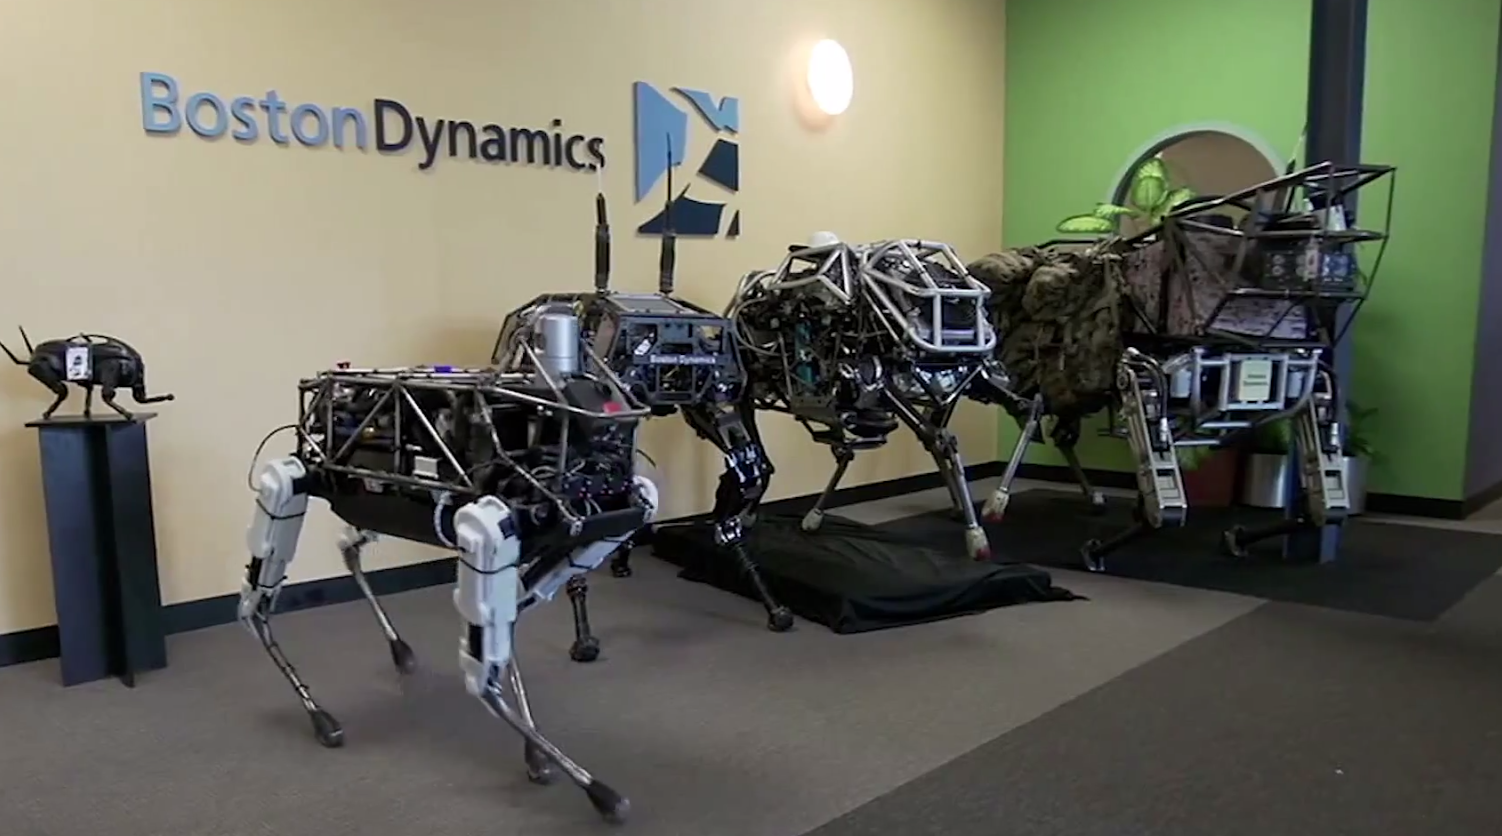 The Unsettling Army of Robots from Boston Dynamics